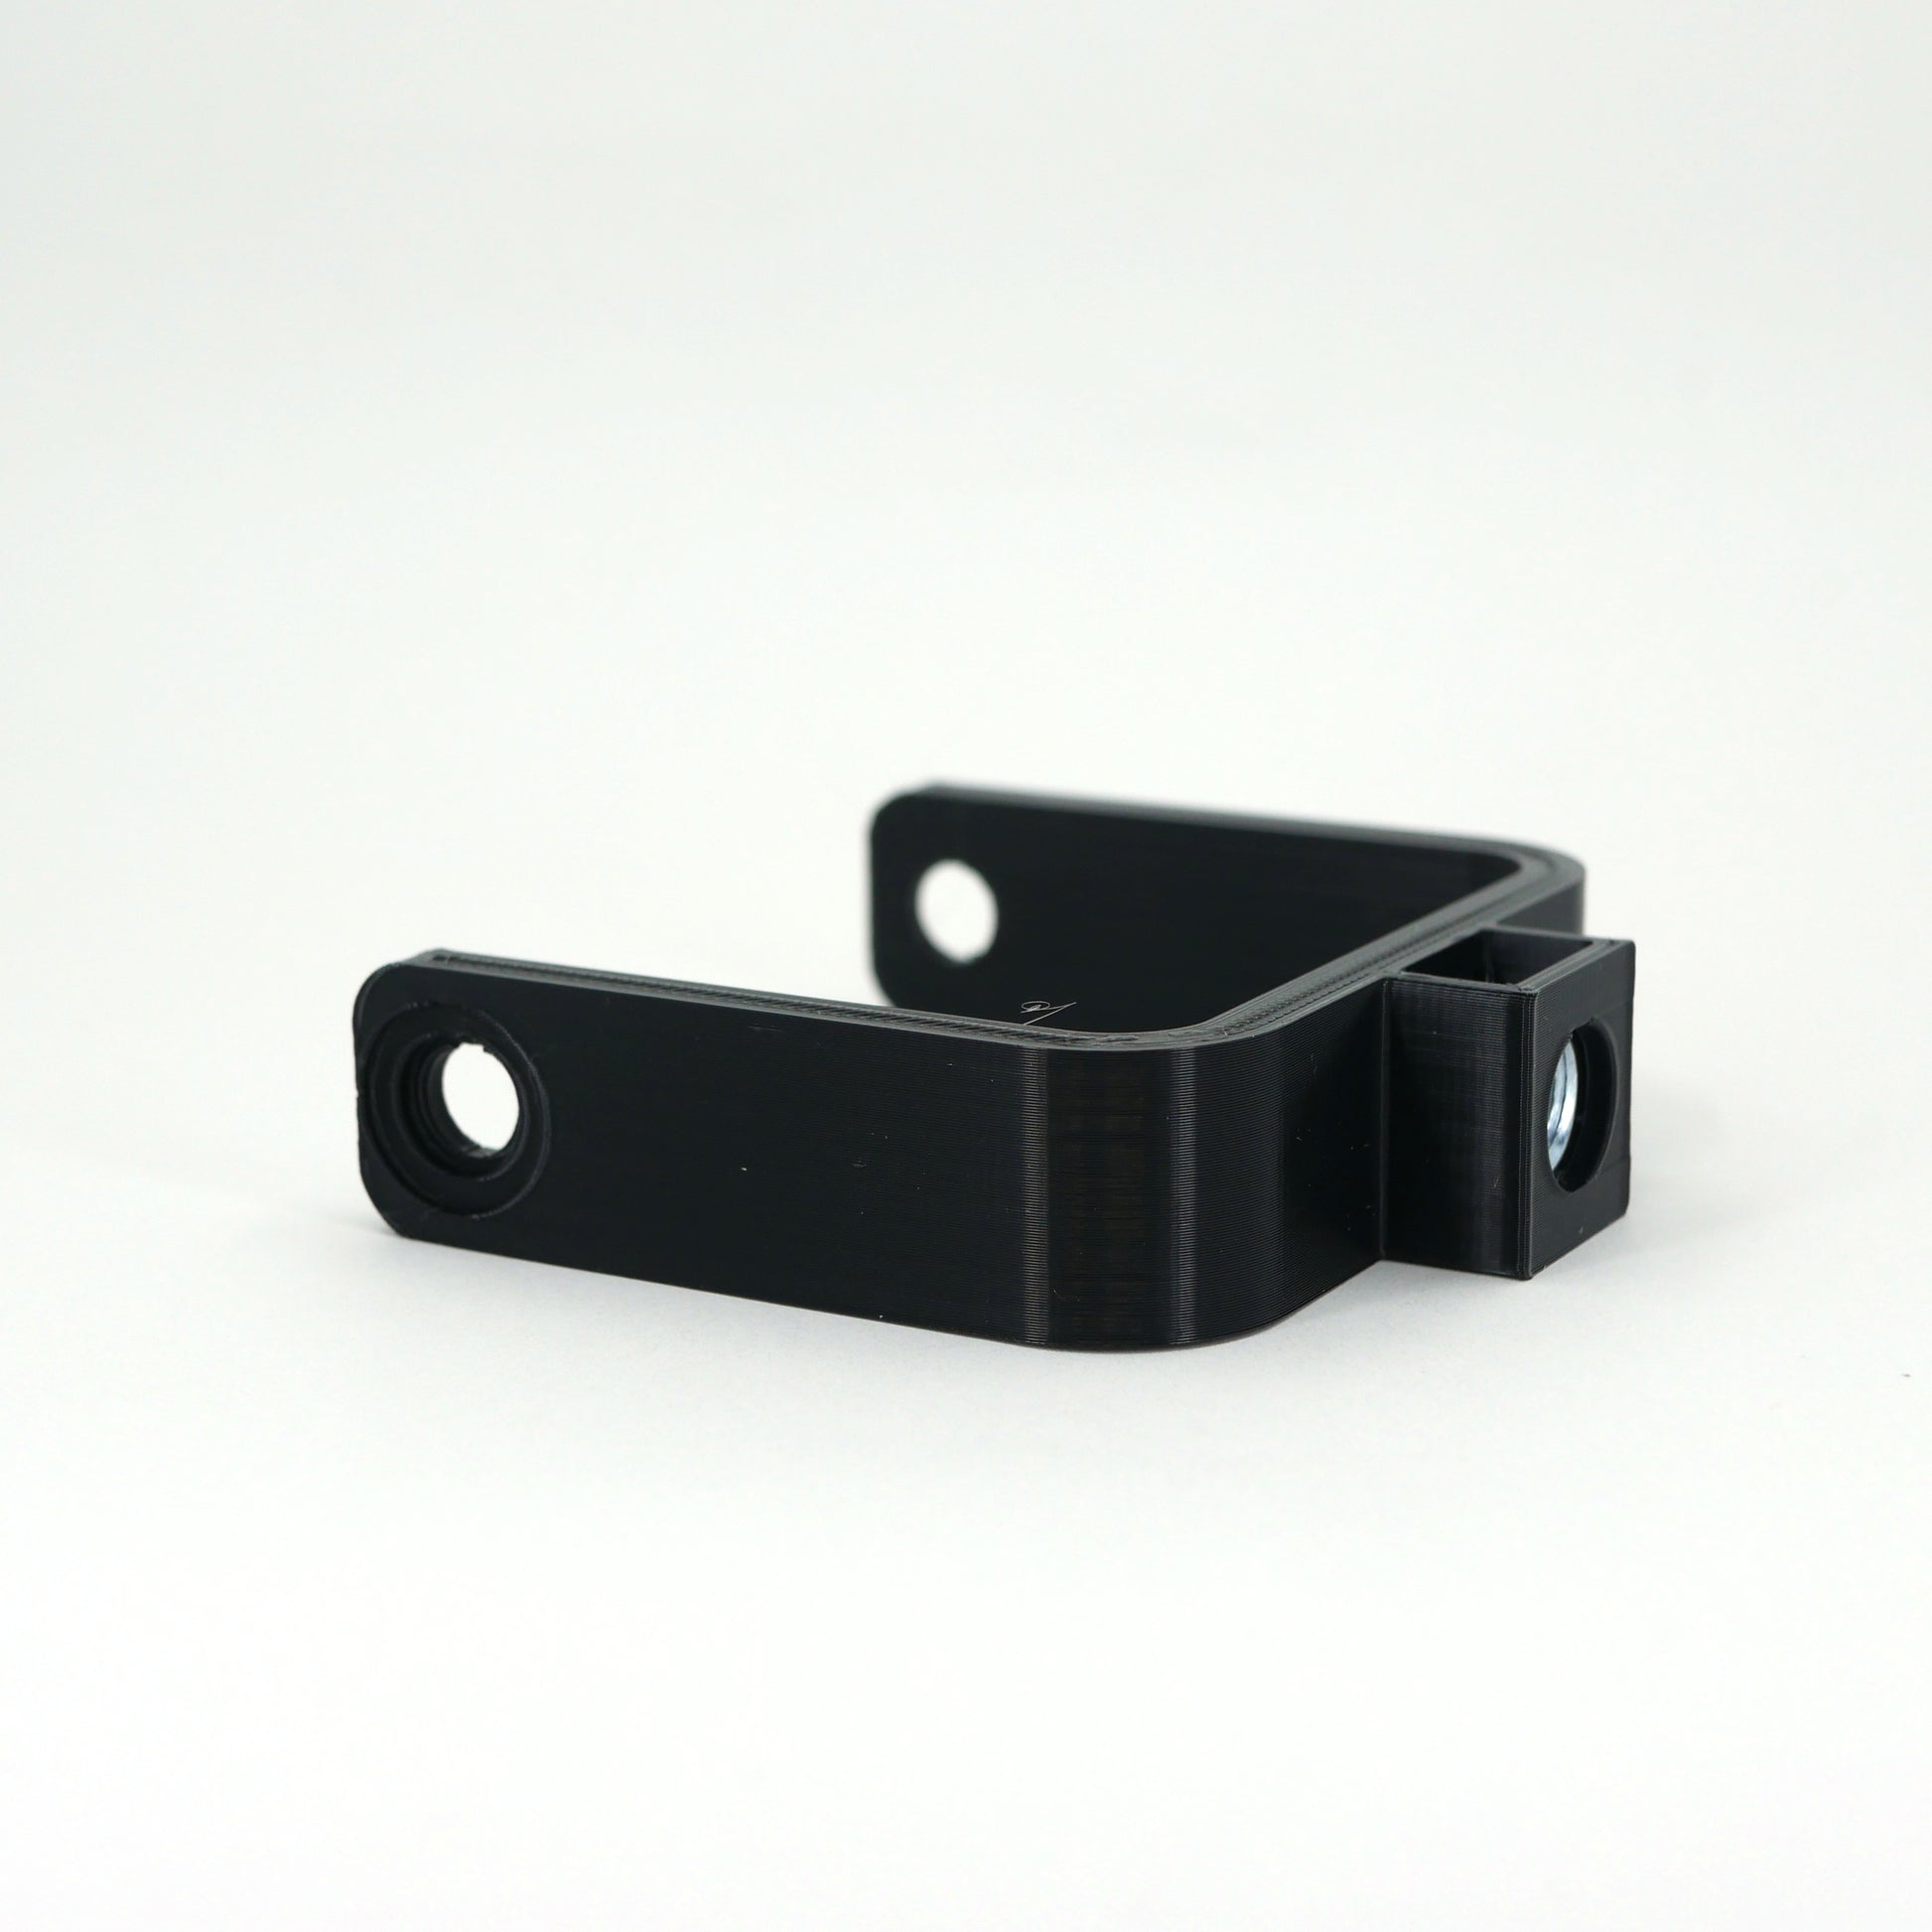 The left side of a black microphone mount for the Elgato Wave microphone.